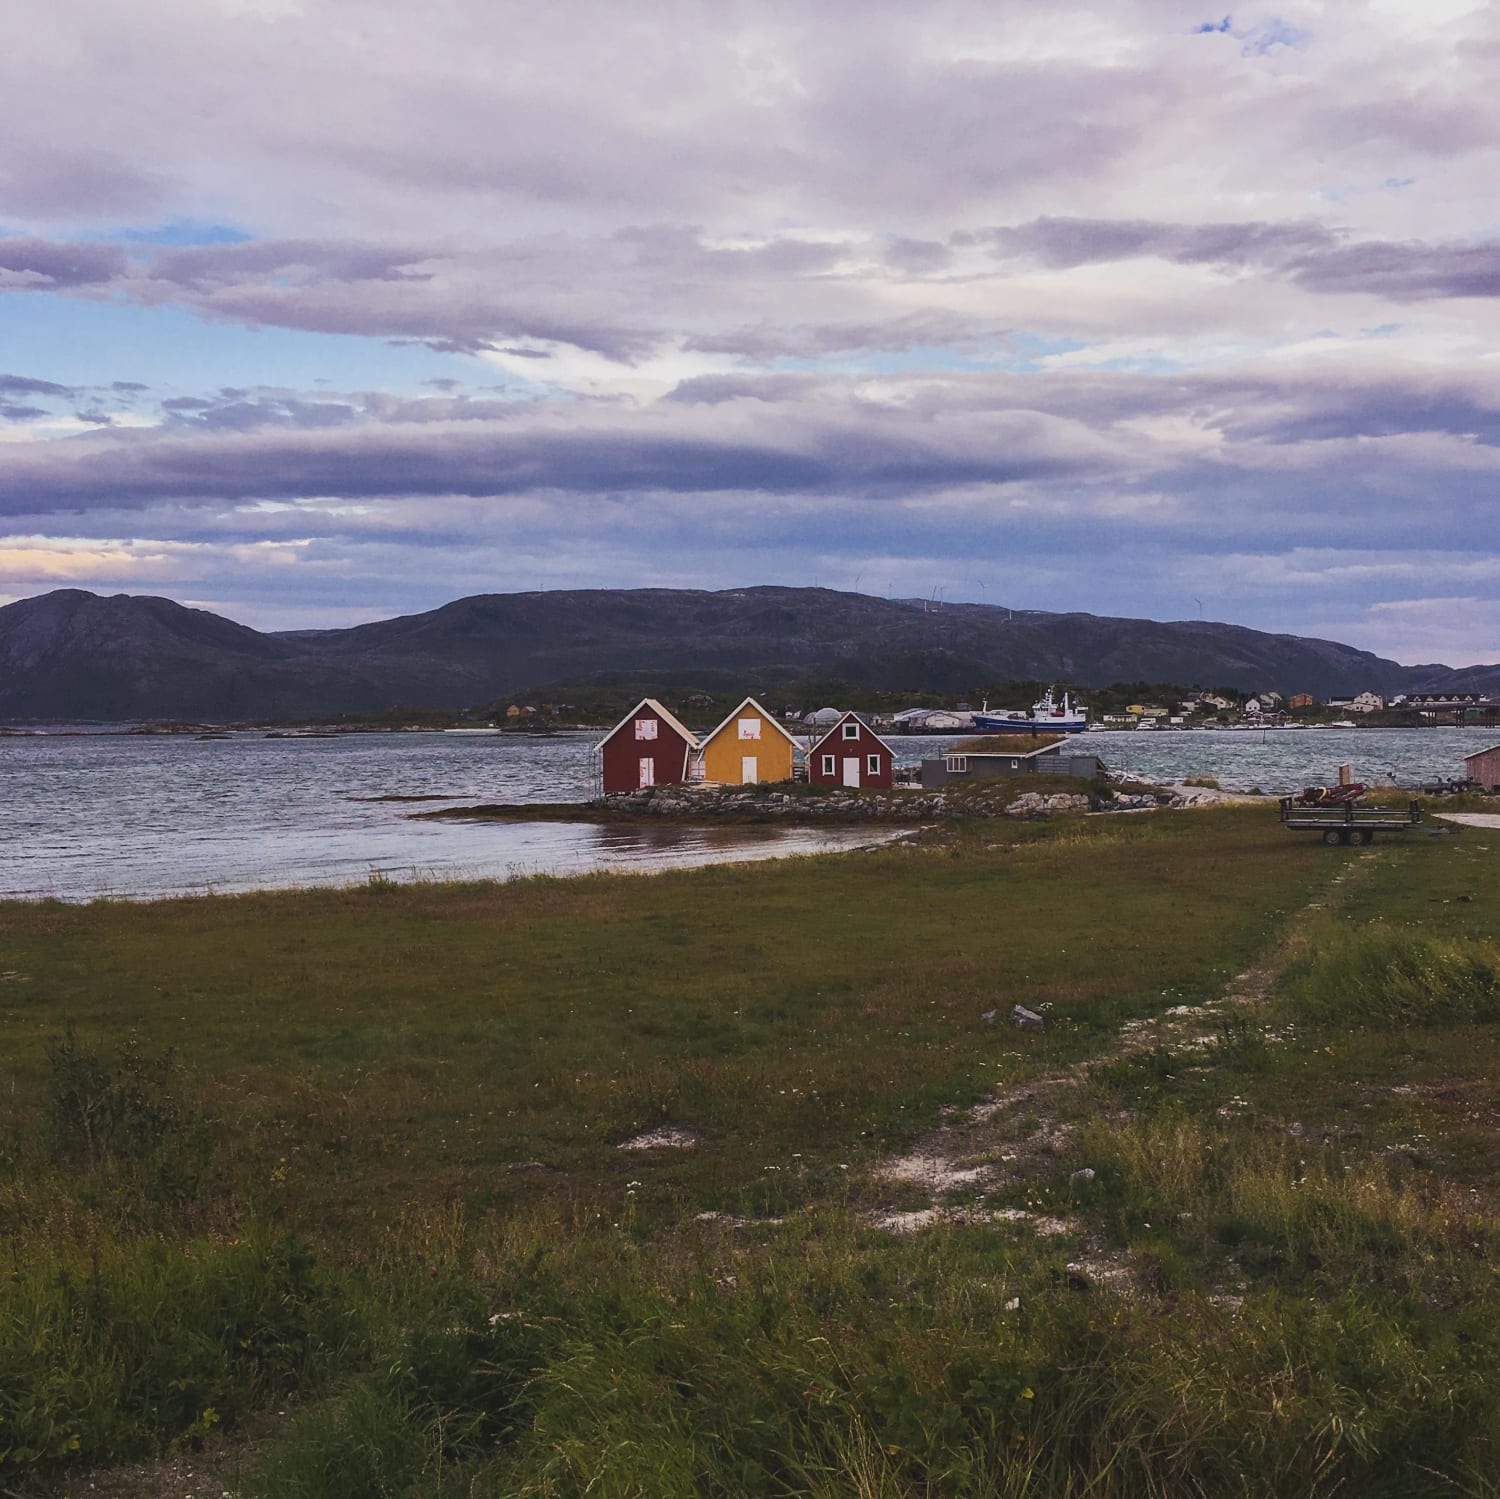 These 3 little houses on the tiny island of Hillesøy, Norway, just over the Arctic Circle